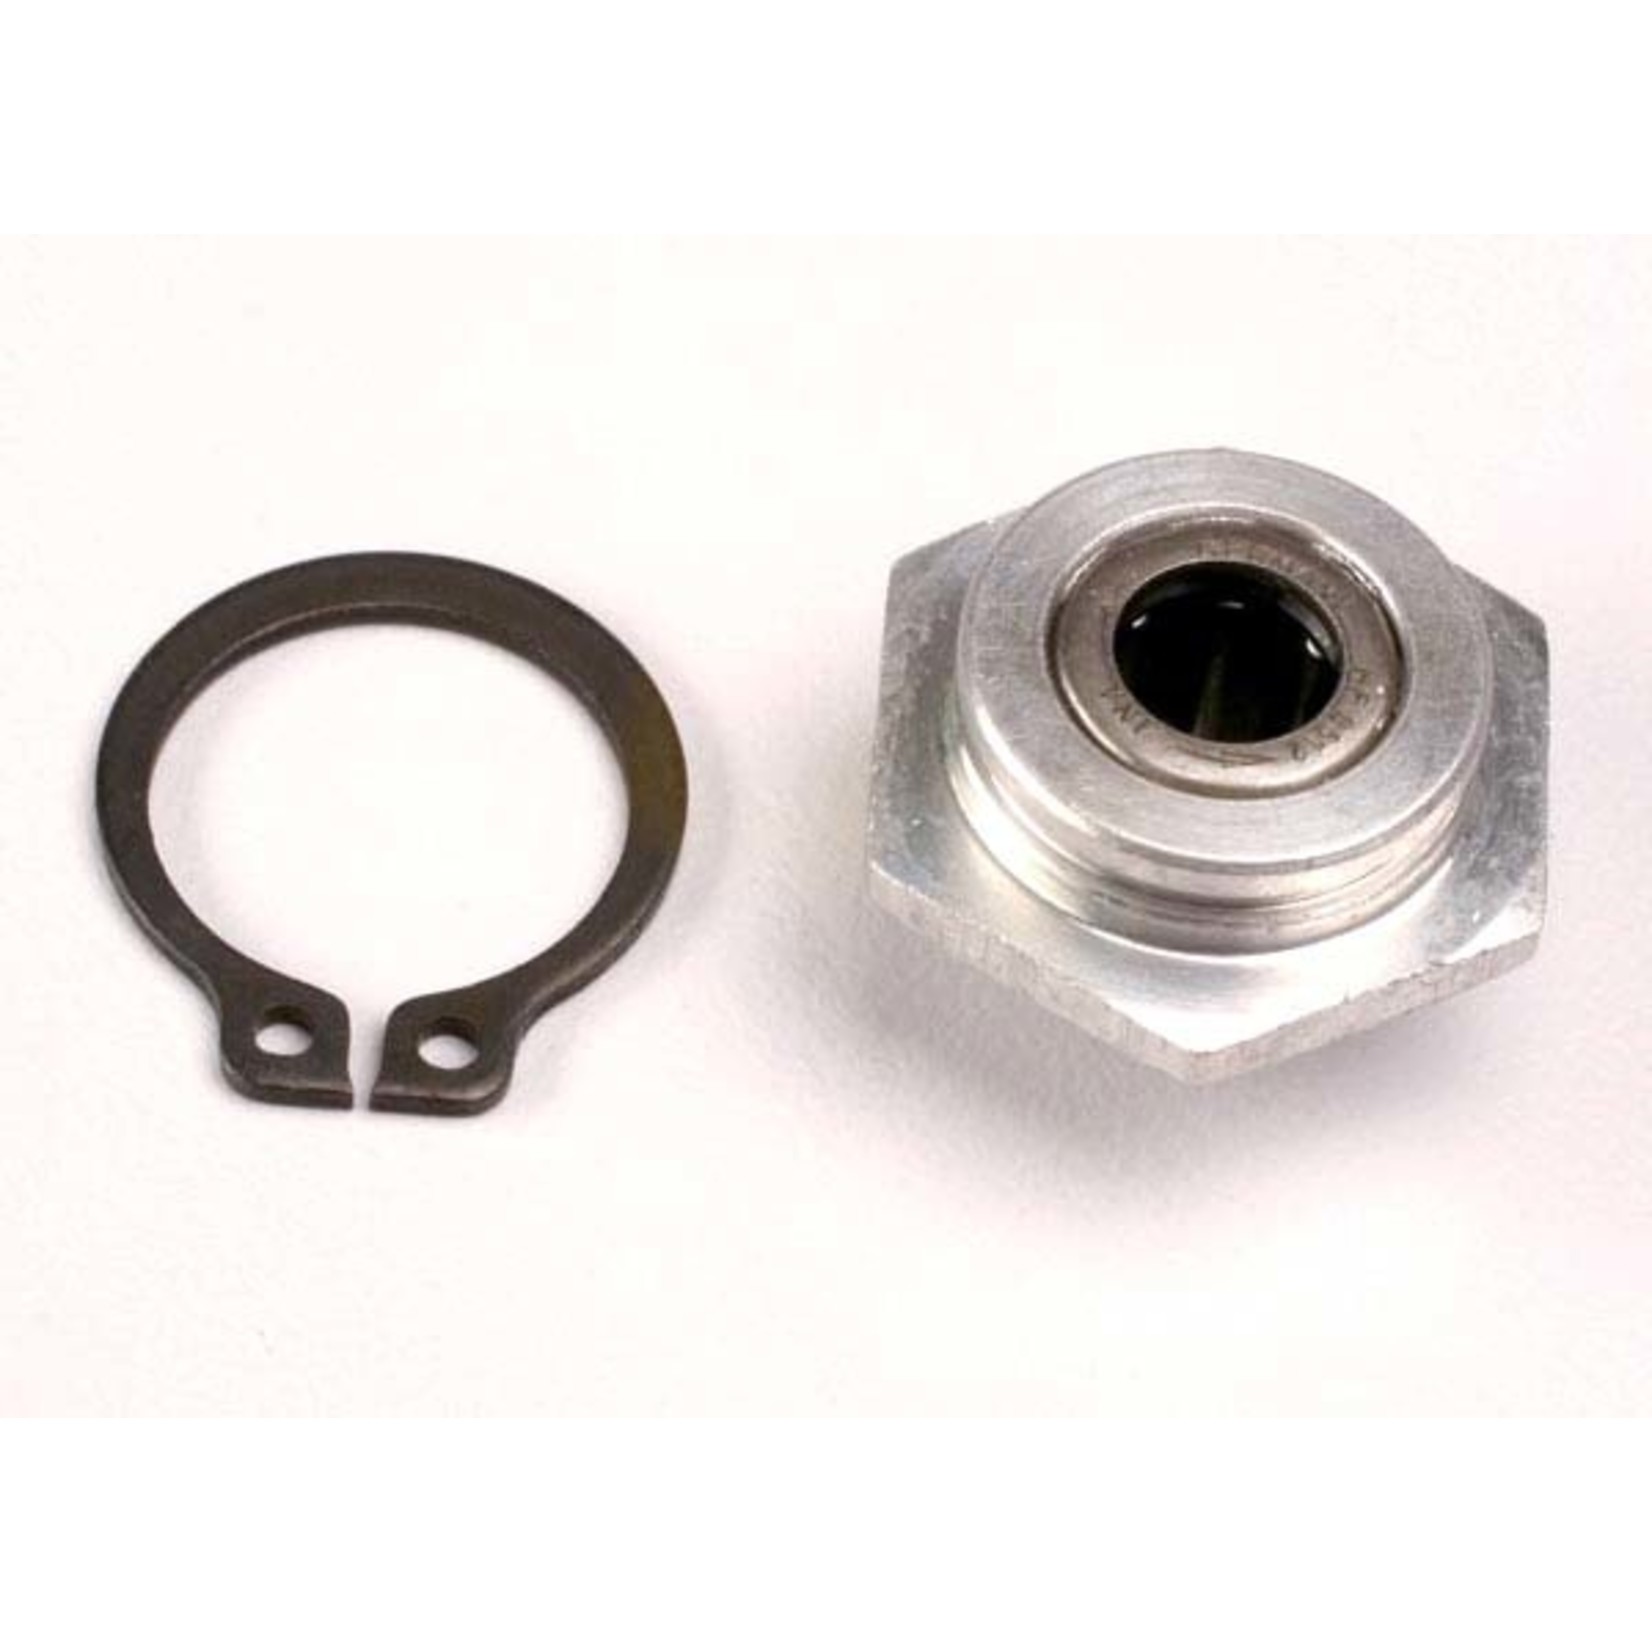 Traxxas 4986 - Gear hub assembly, 1st/one-way bearing/ sna